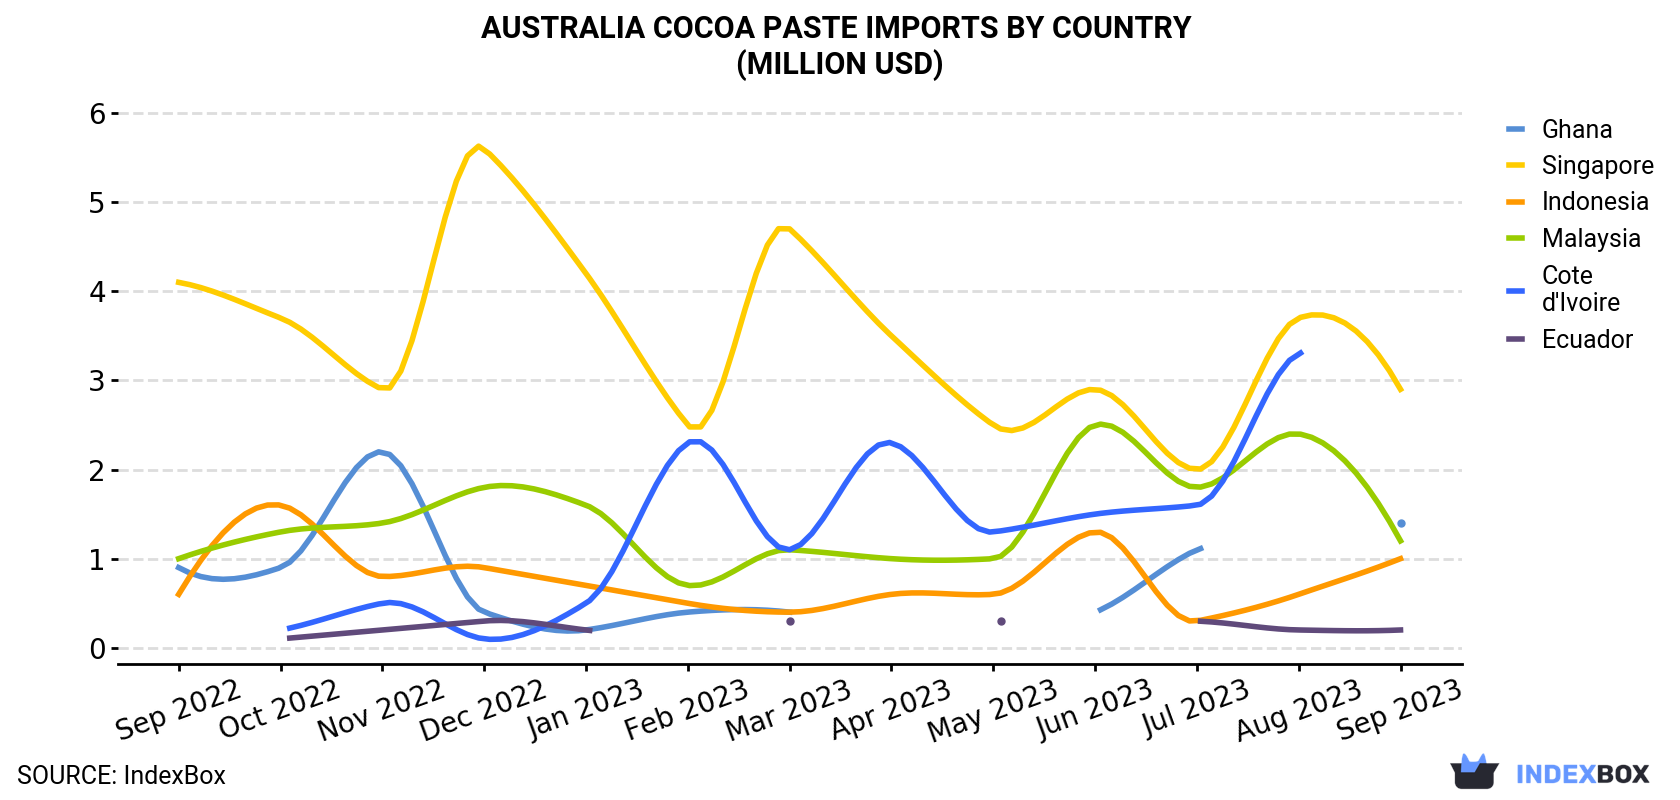 Australia Cocoa Paste Imports By Country (Million USD)